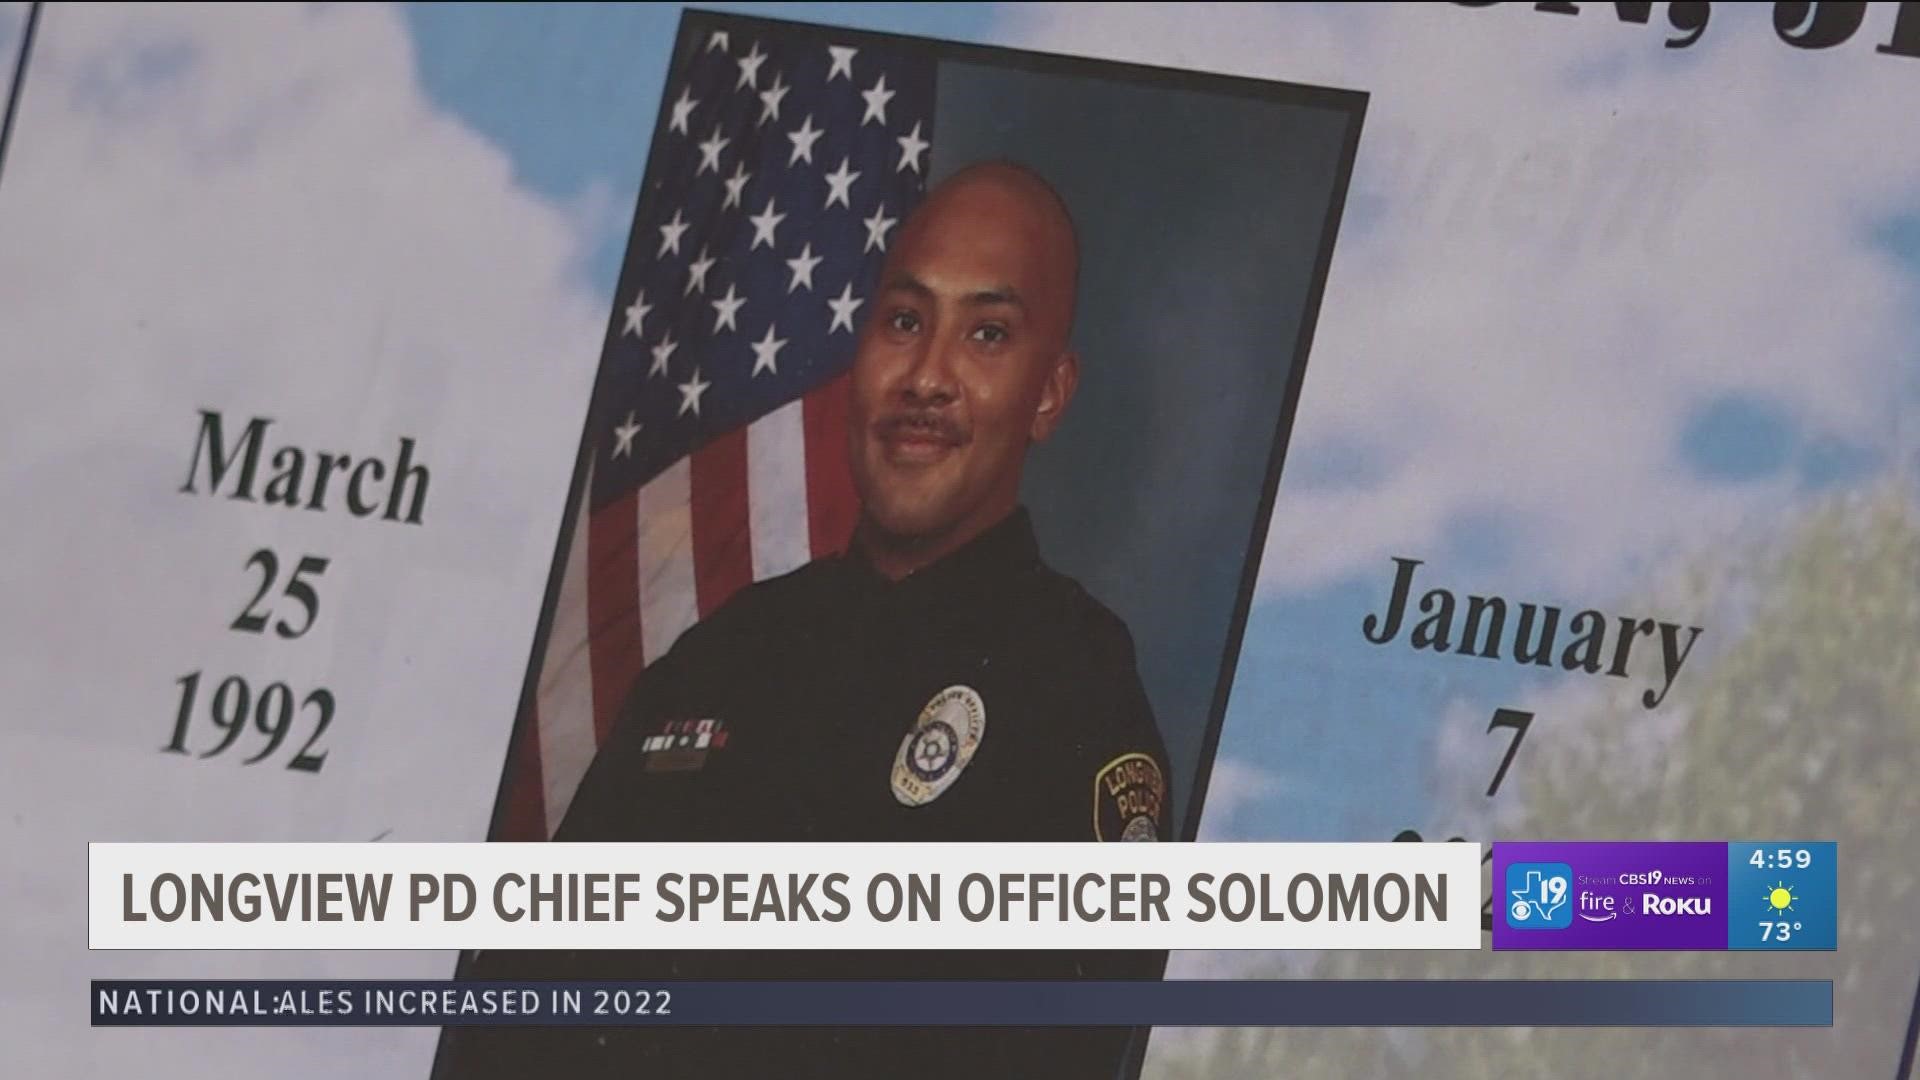 Chief Boone called Officer Solomon a quiet giant – someone who also had a smile, was a professional and a hard worker.